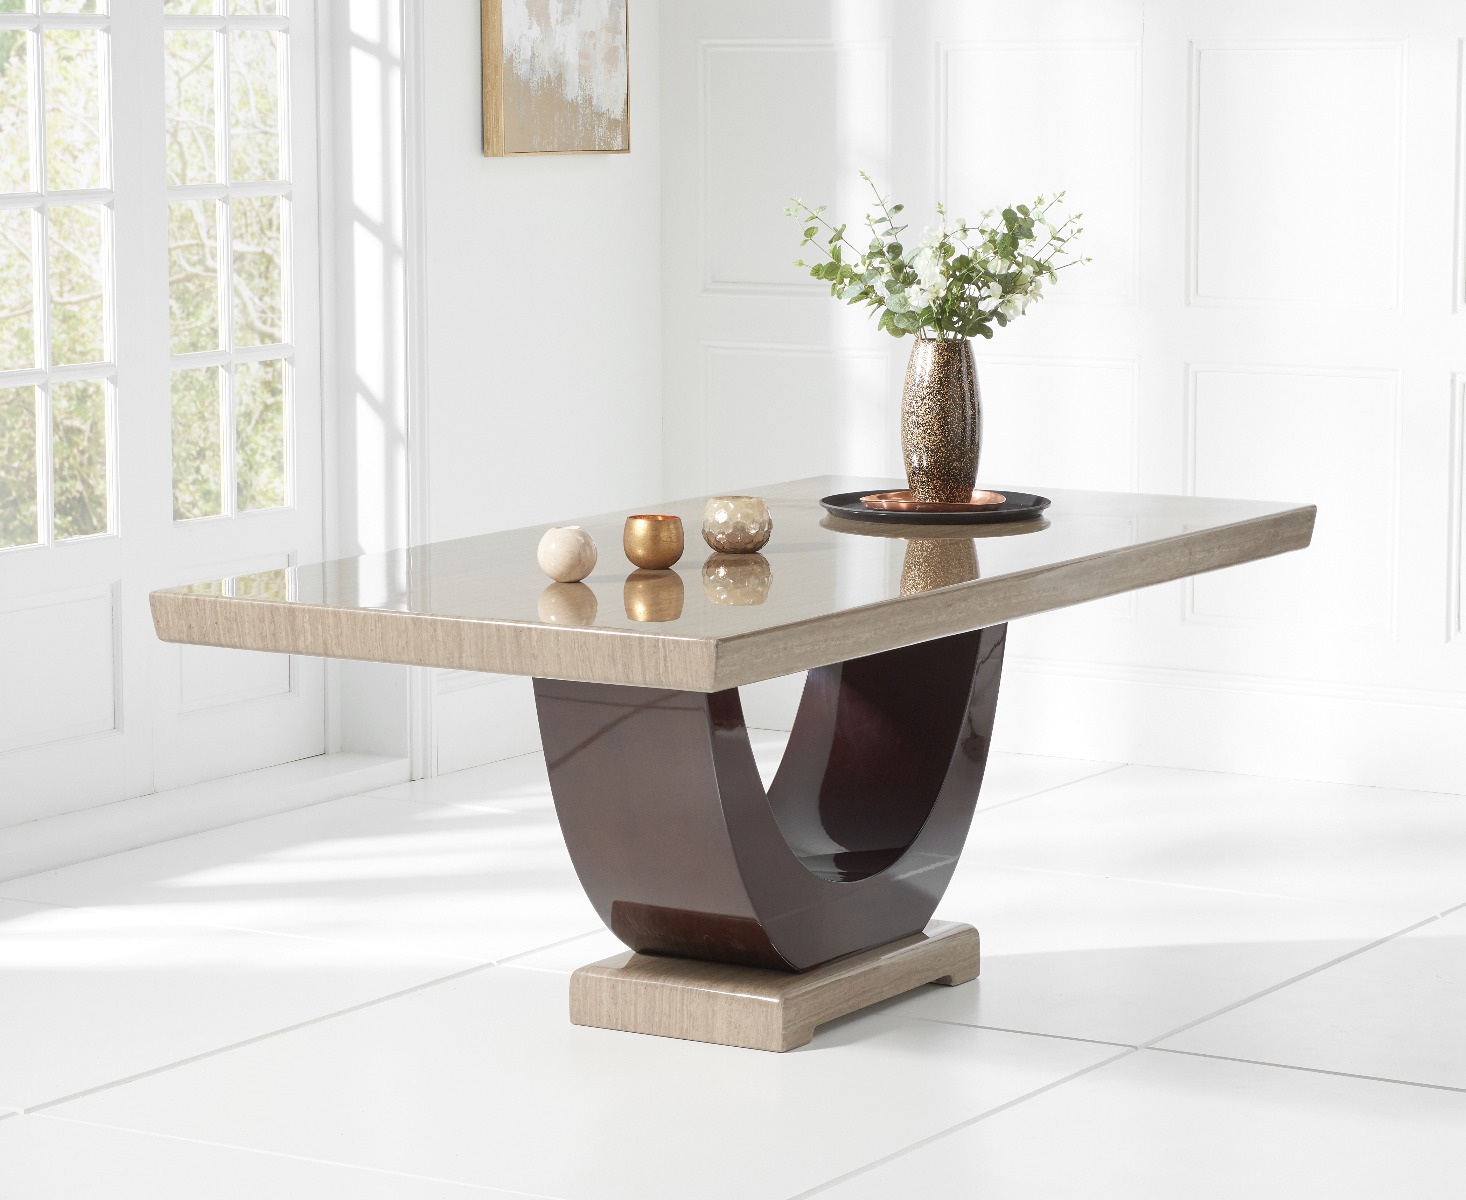 Photo 4 of Novara 170cm brown pedestal marble dining table with 4 grey sophia chairs